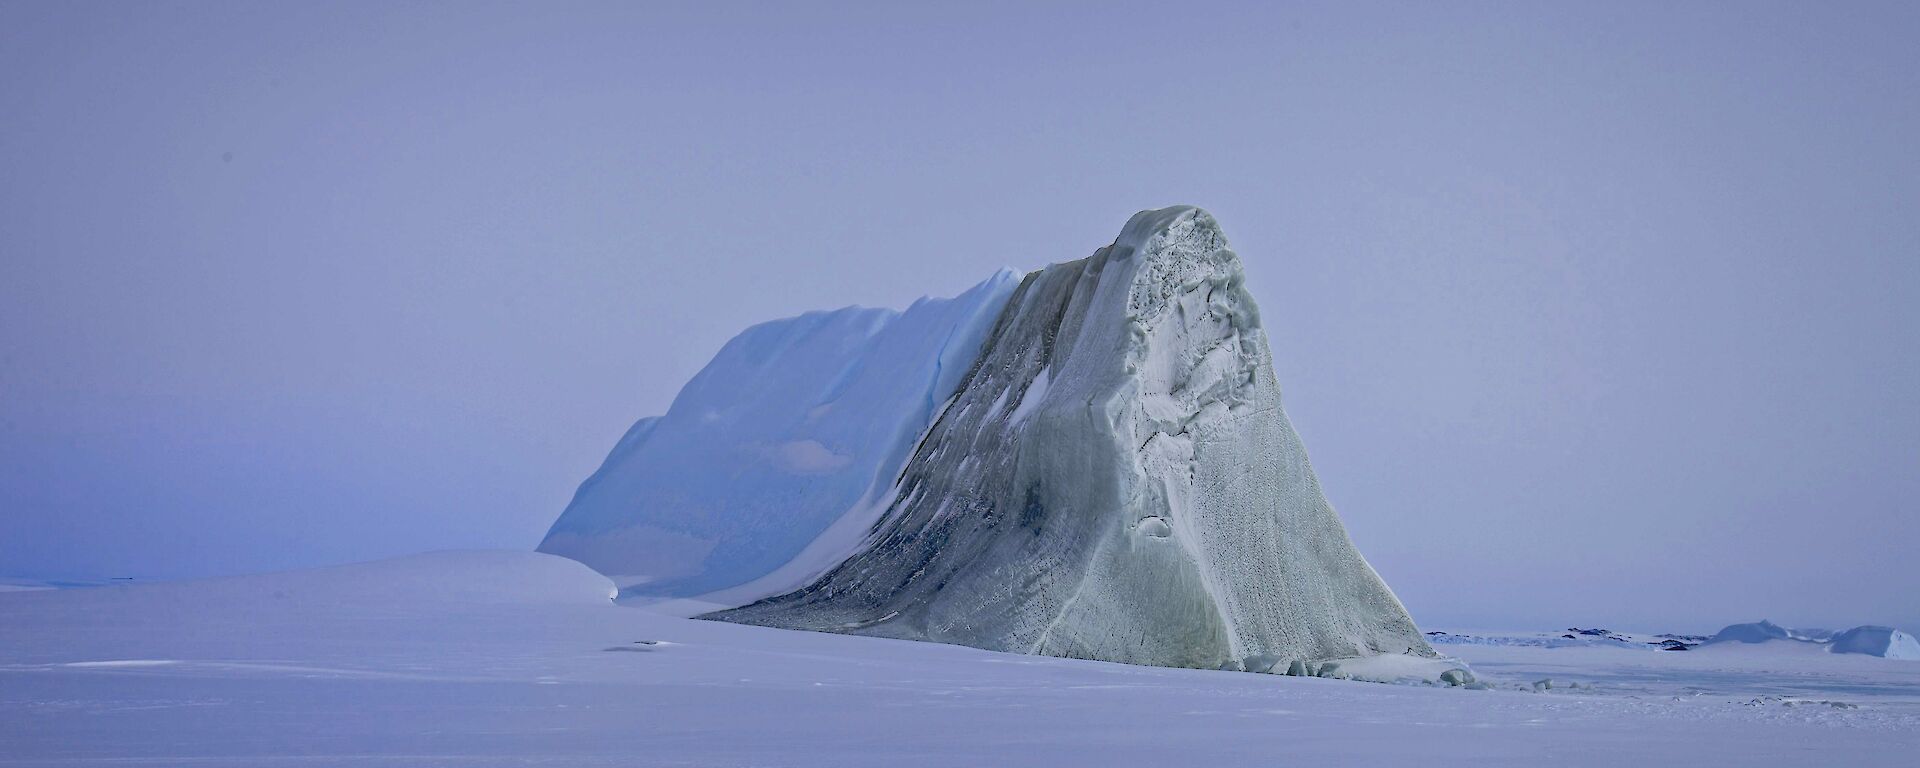 A jade iceberg in the middle of a snowy landscape, half covered in snow